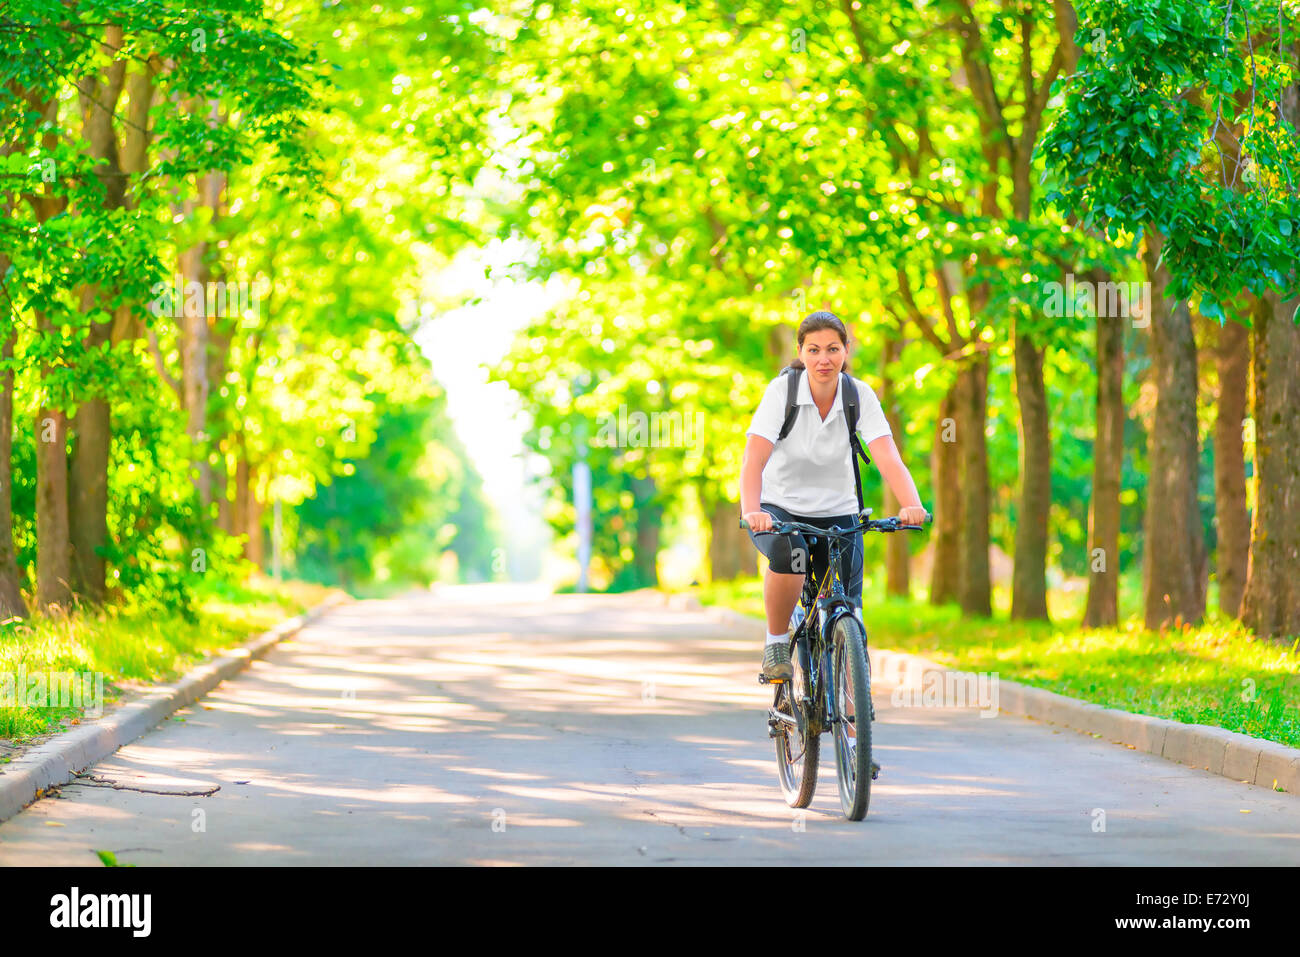 young girl on a bicycle in a park in the early morning Stock Photo